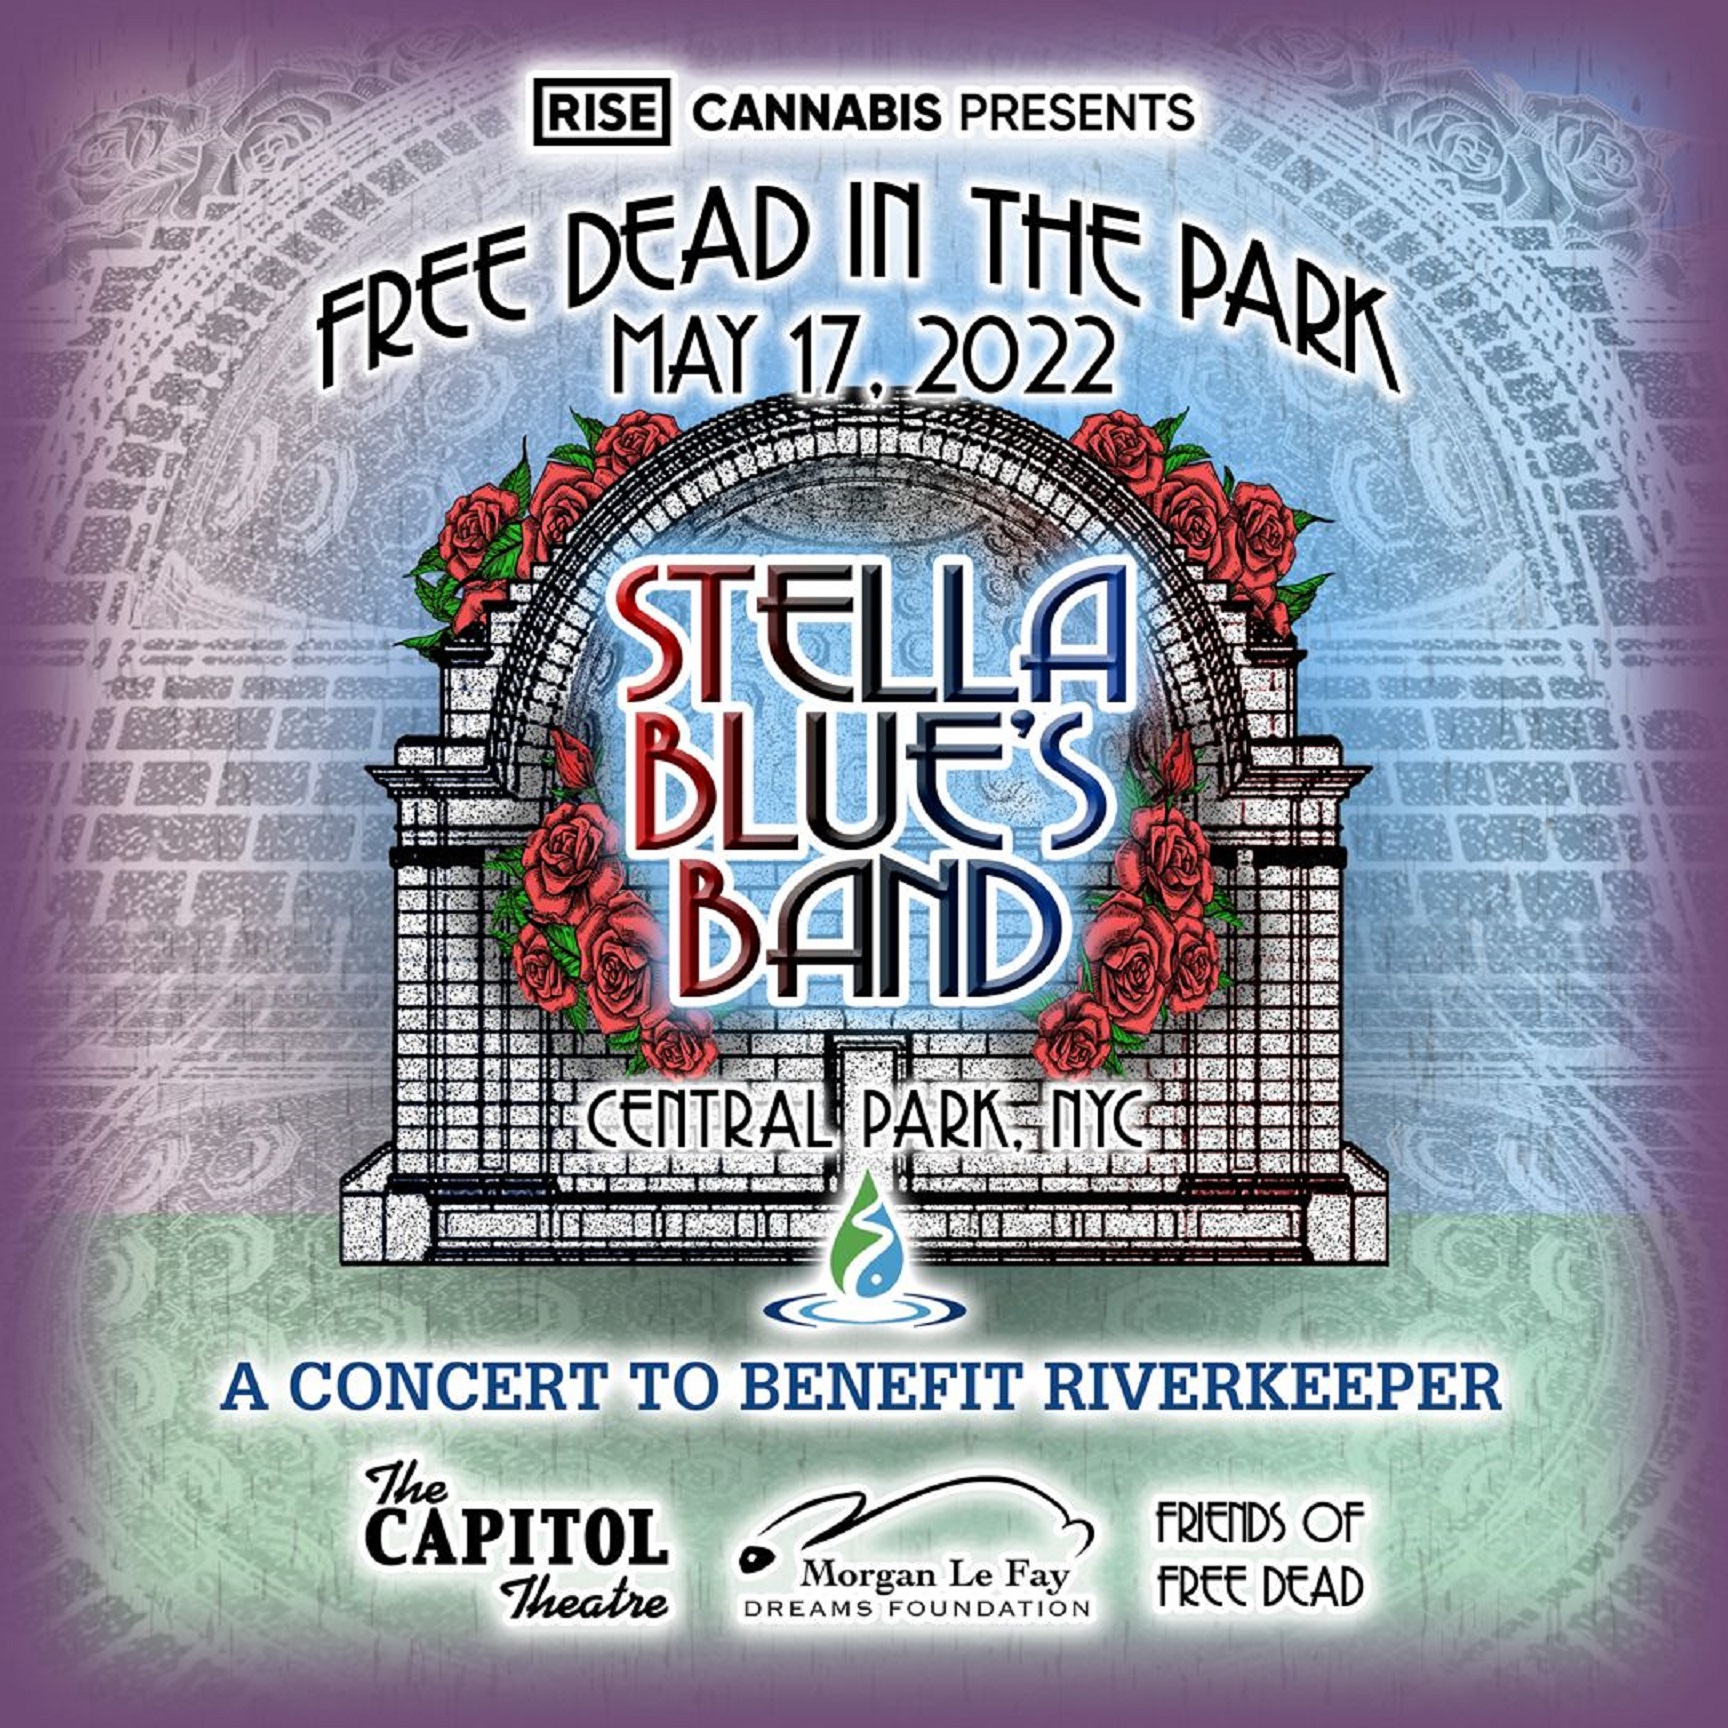 FREE DEAD IN THE PARK A CONCERT TO BENEFIT RIVERKEEPER